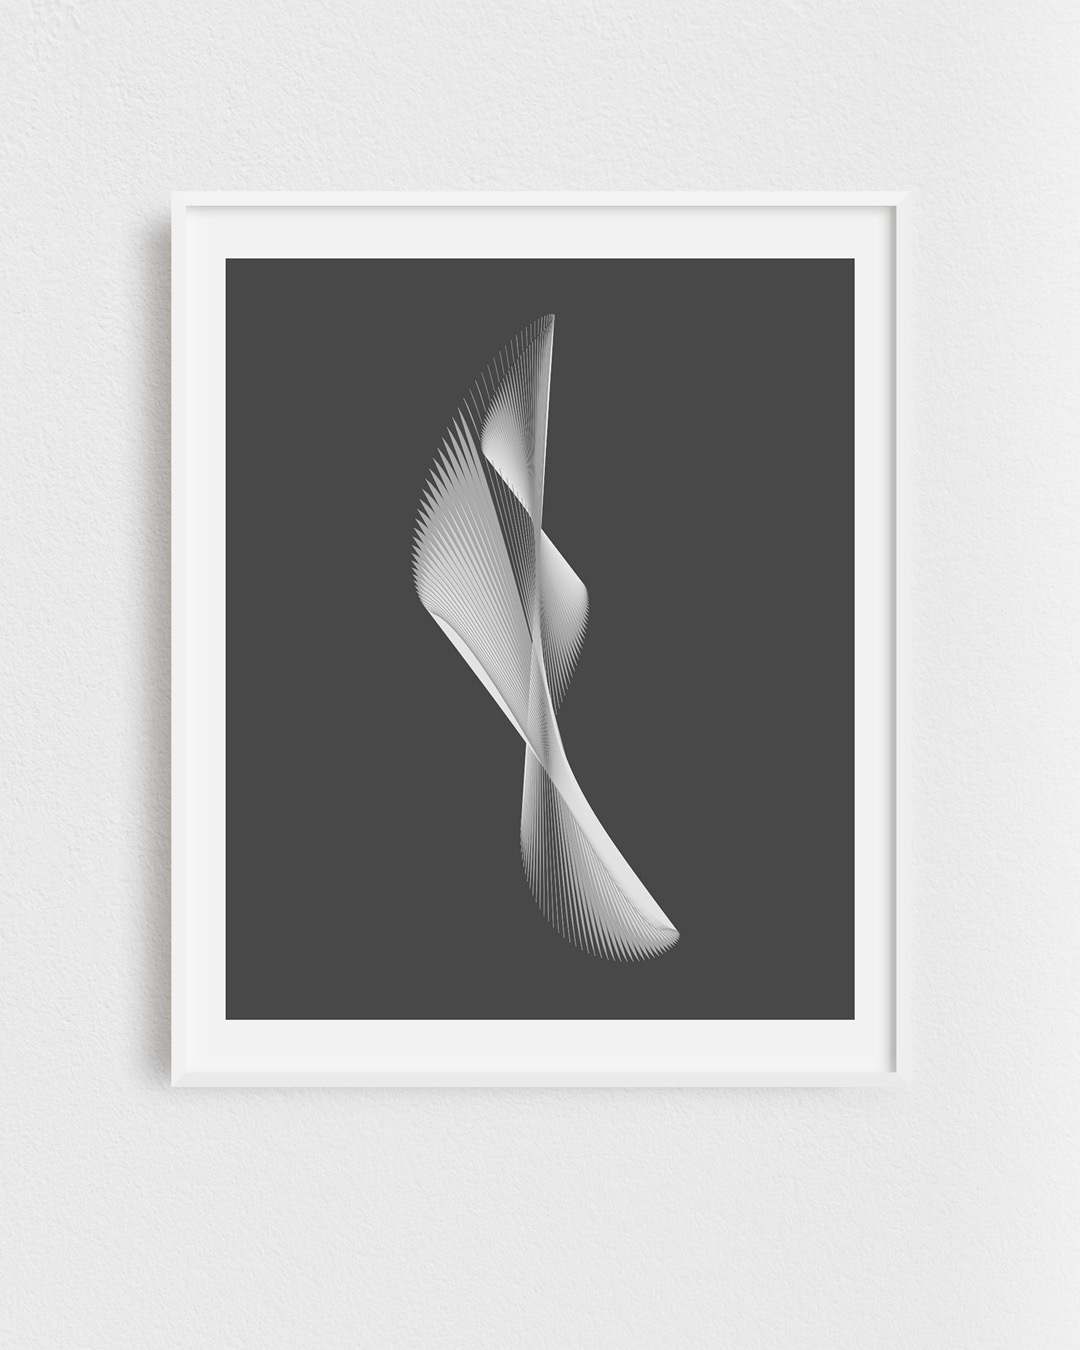 An abstract framed illustration called “Dove”